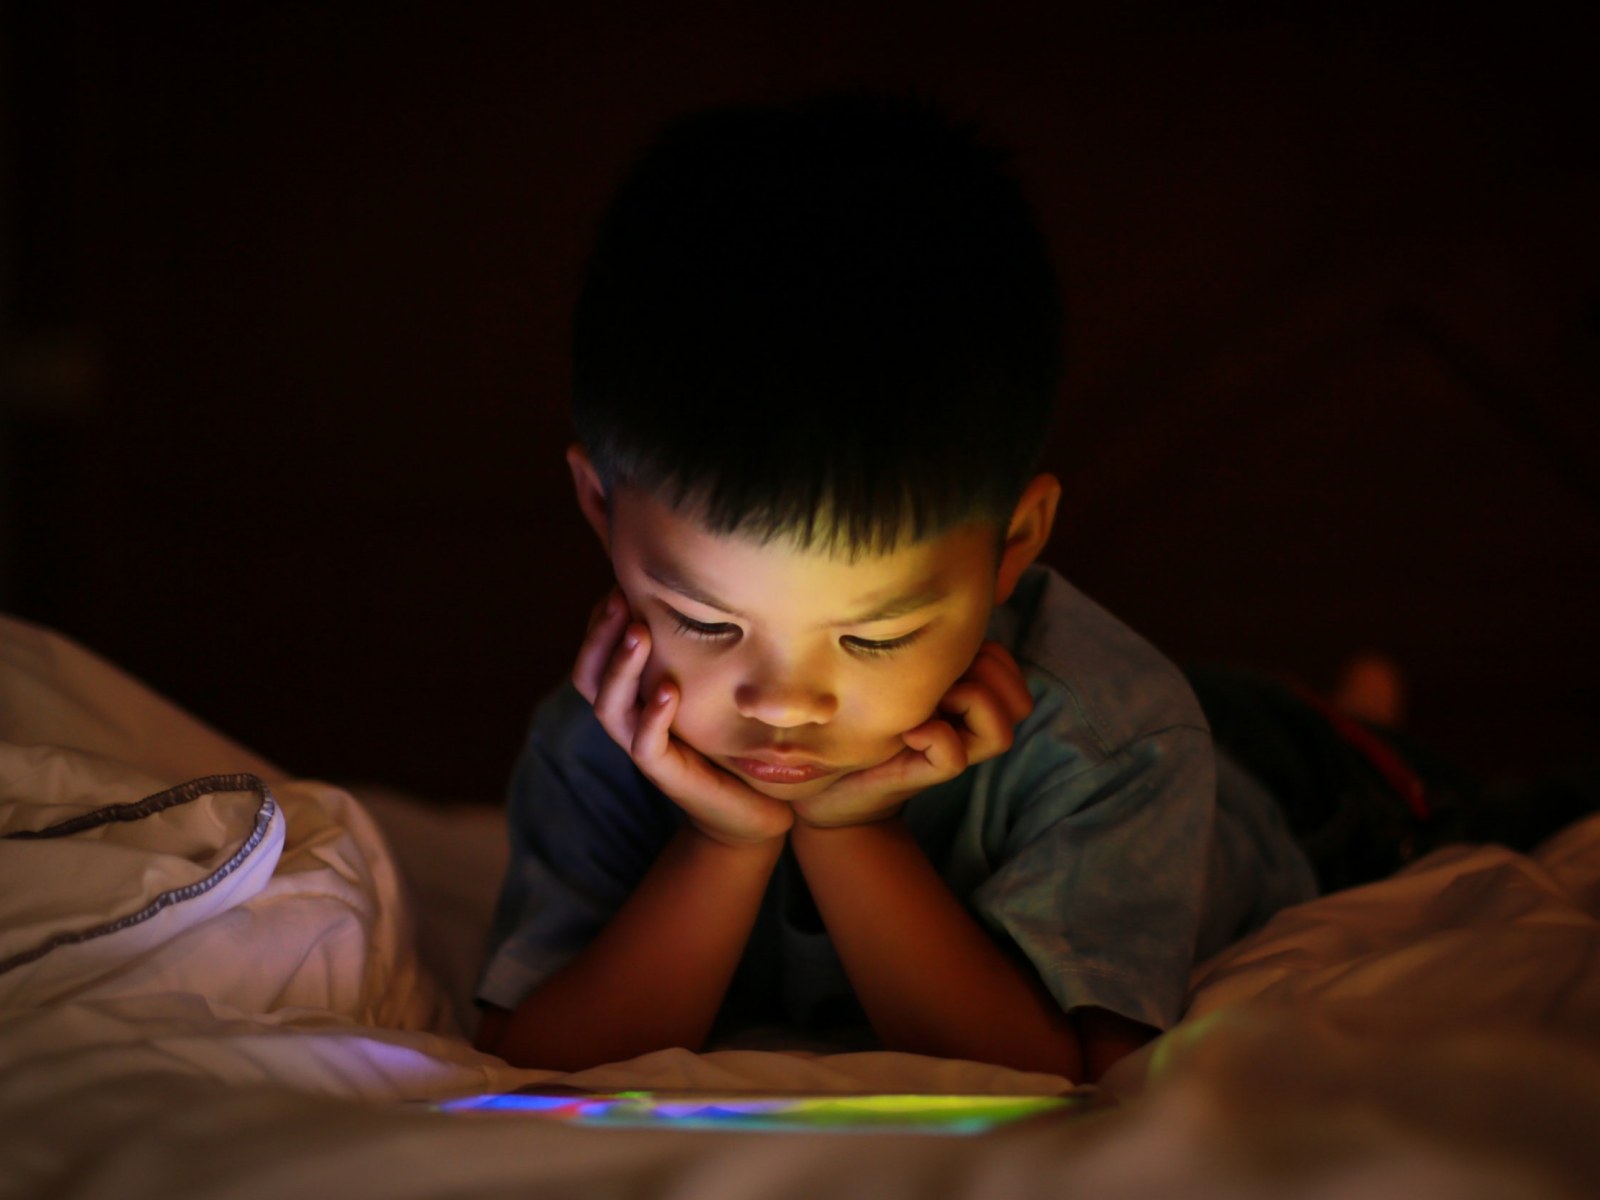 Know the effect of increasing screen time on your health